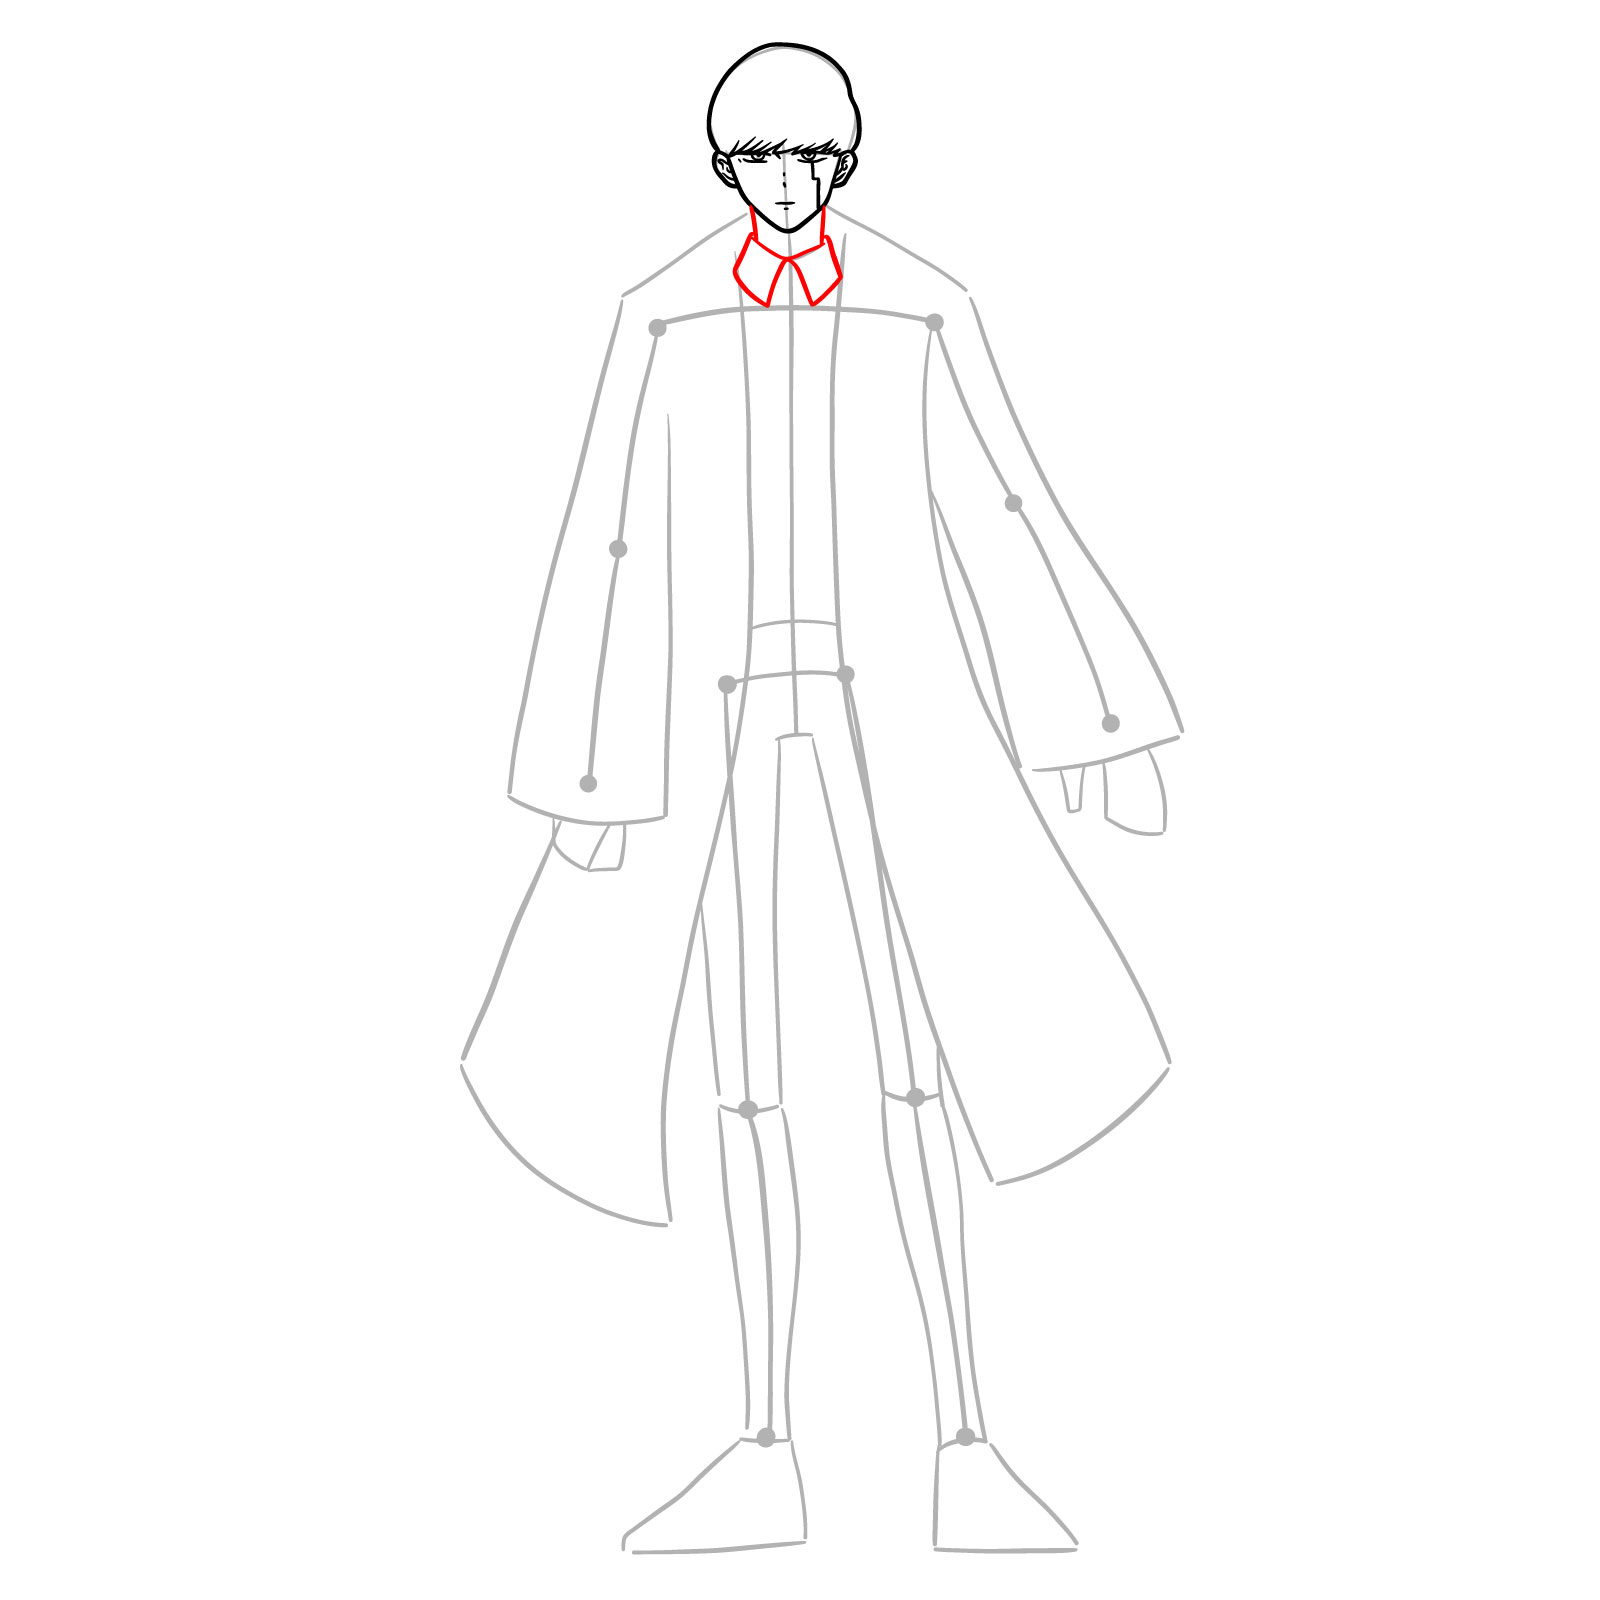 Illustration of neck and shirt collar - step 08